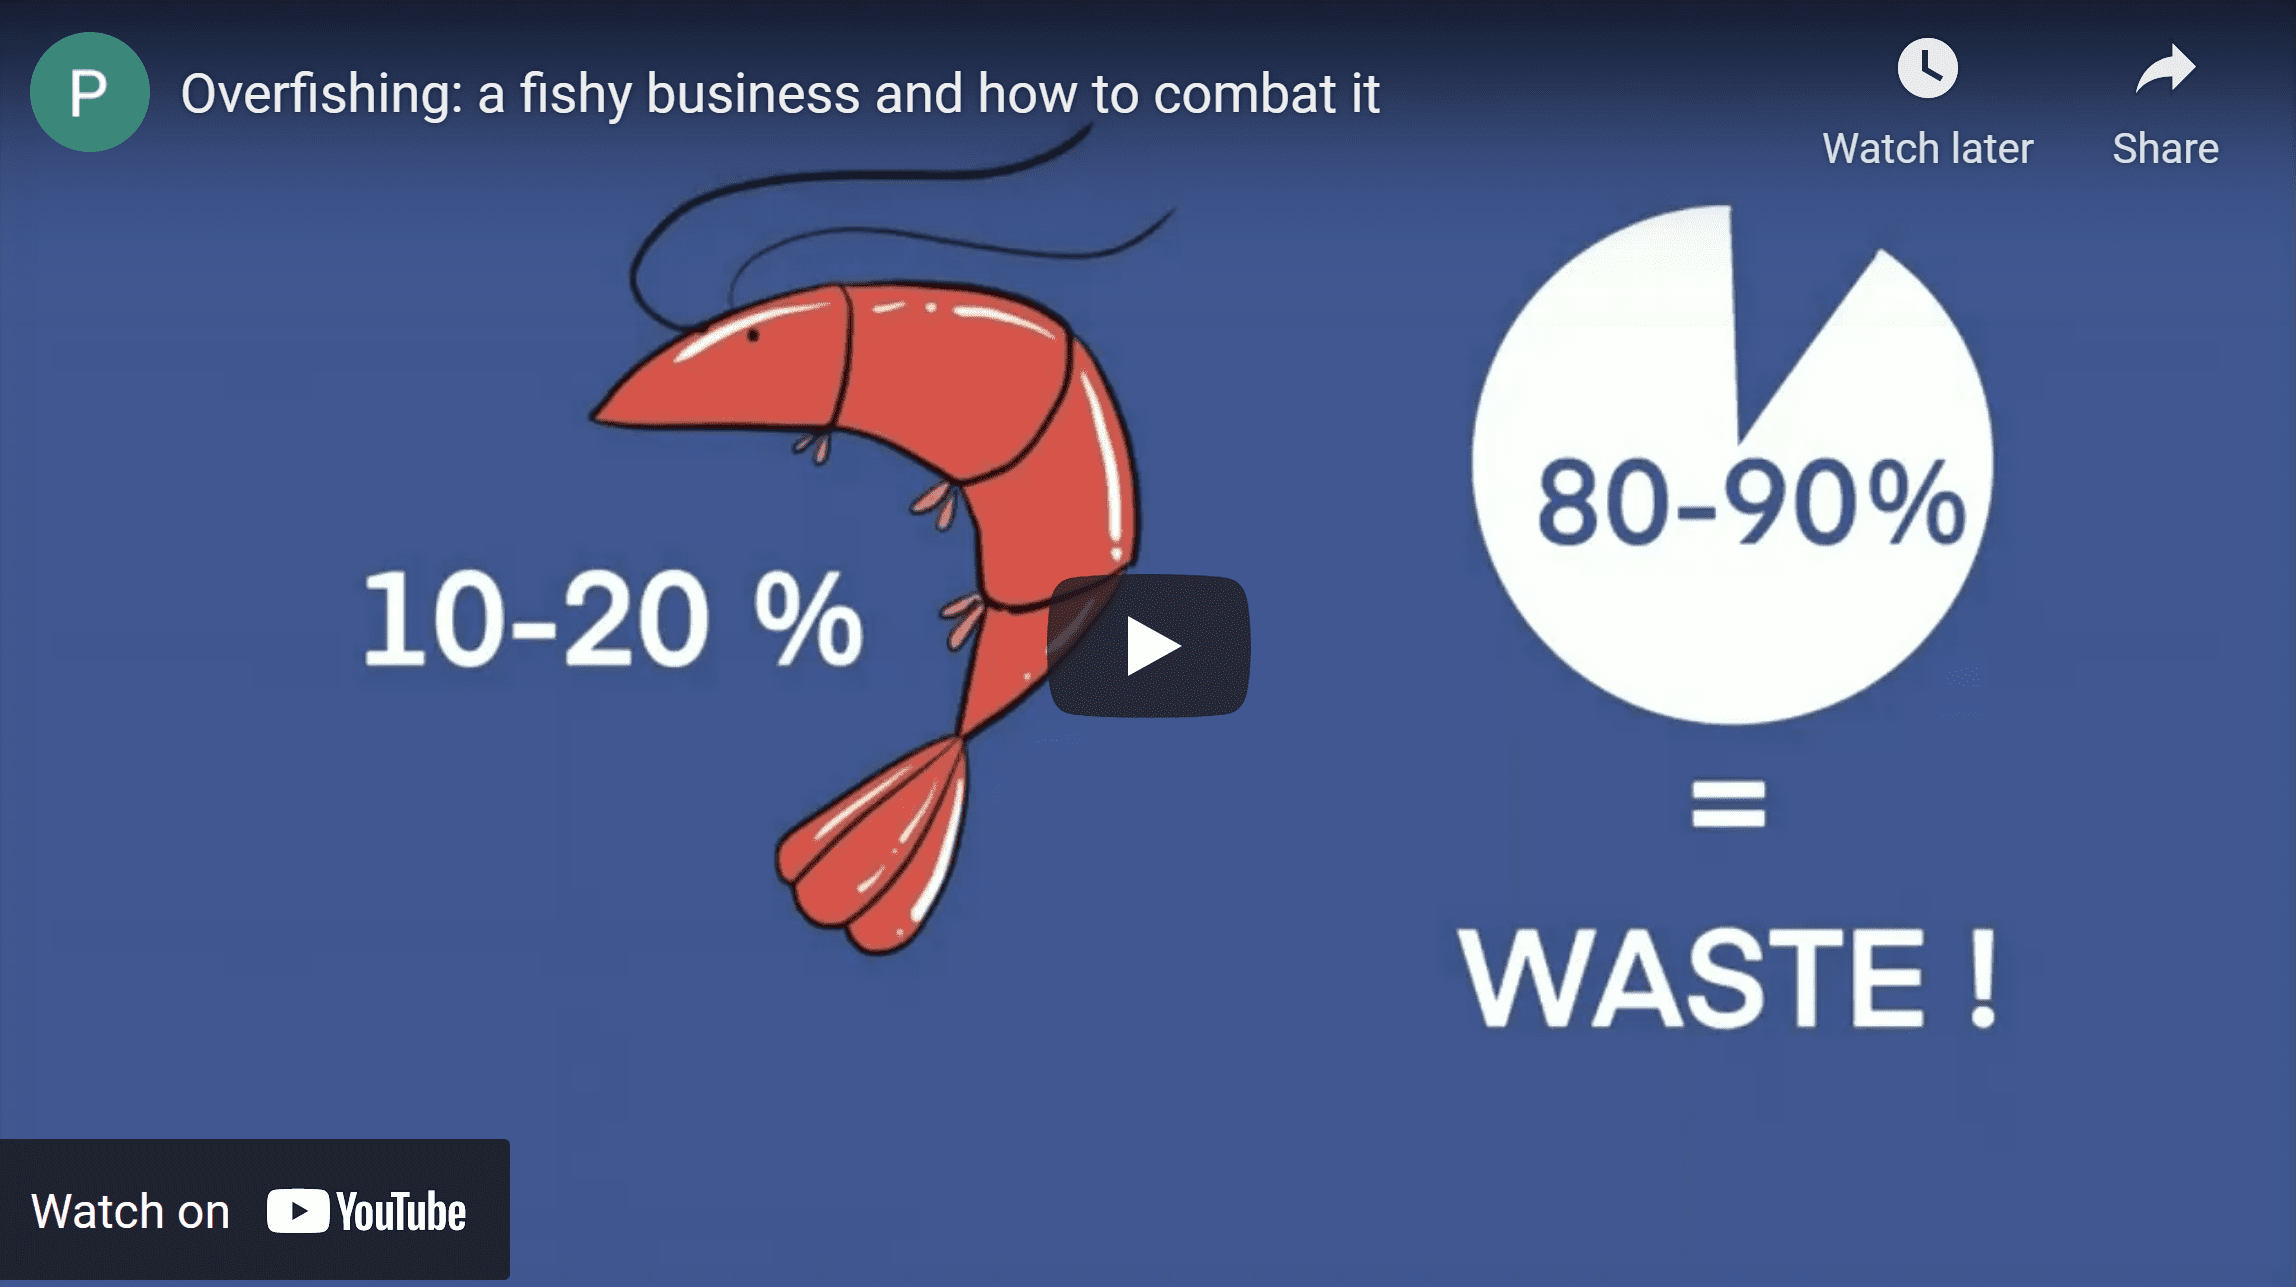 Video screenshot for Overfishing: A Fishy Business and How to Combat It by Fatma Raghani, Mauritania